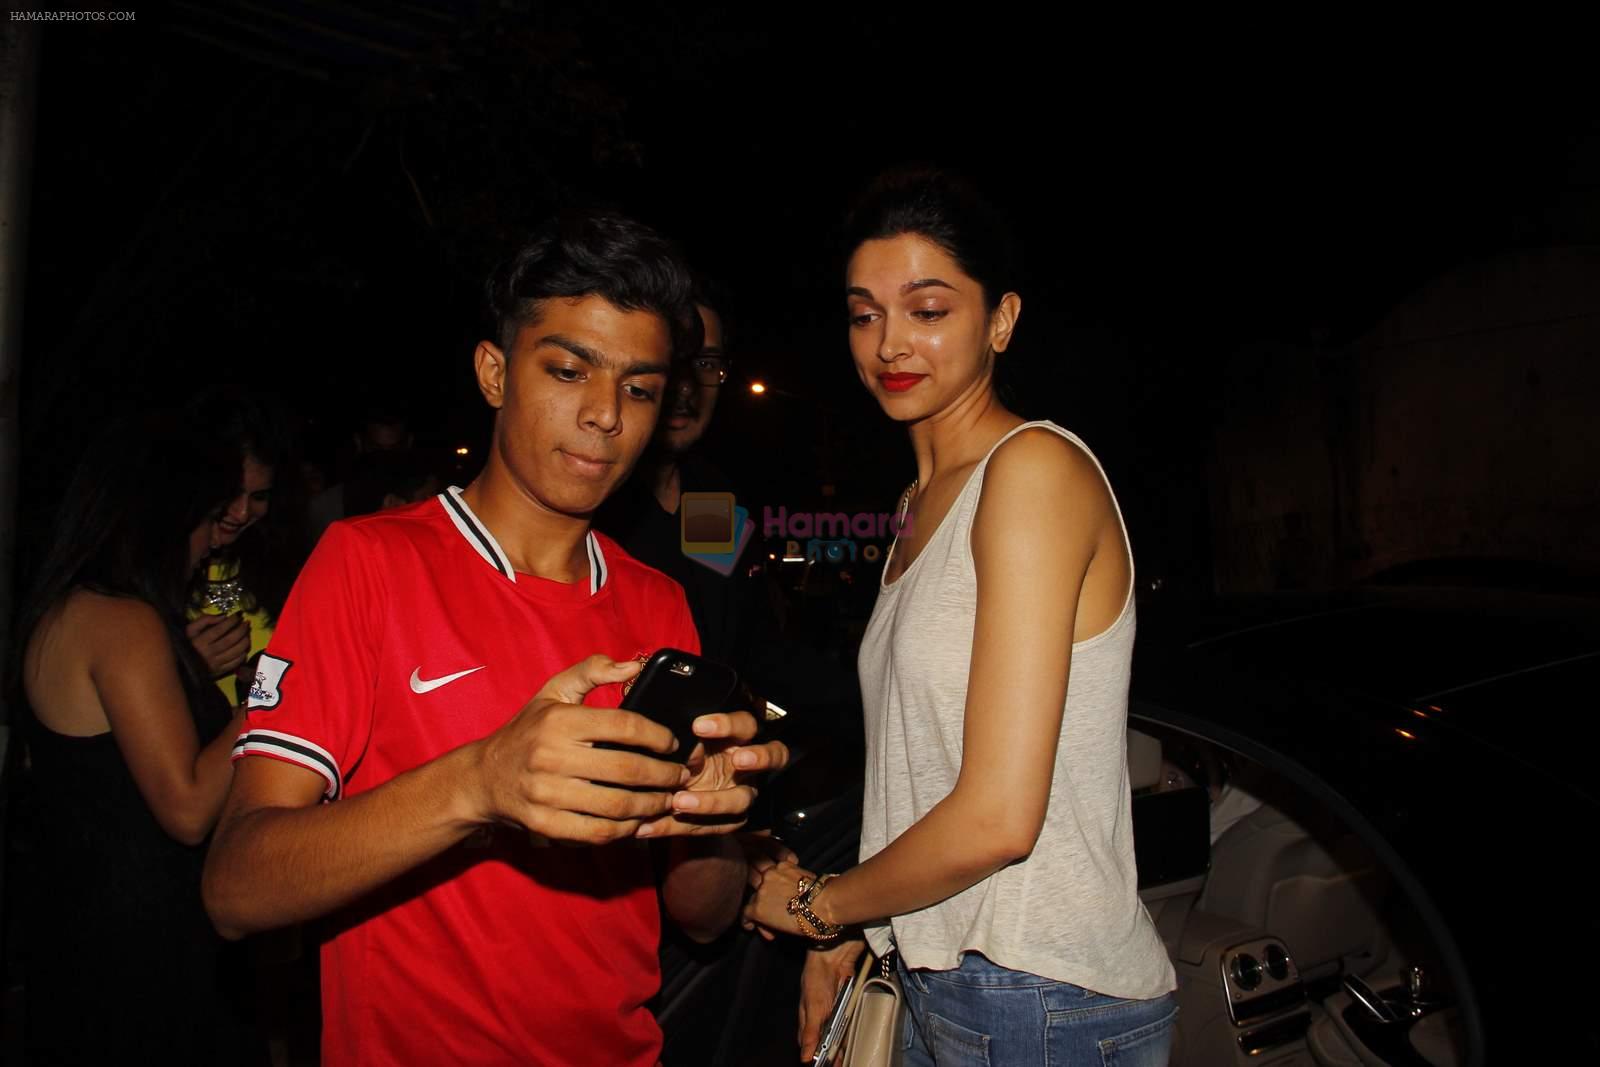 Deepika Padukone snapped with an international film maker at Olive on 13th June 2015